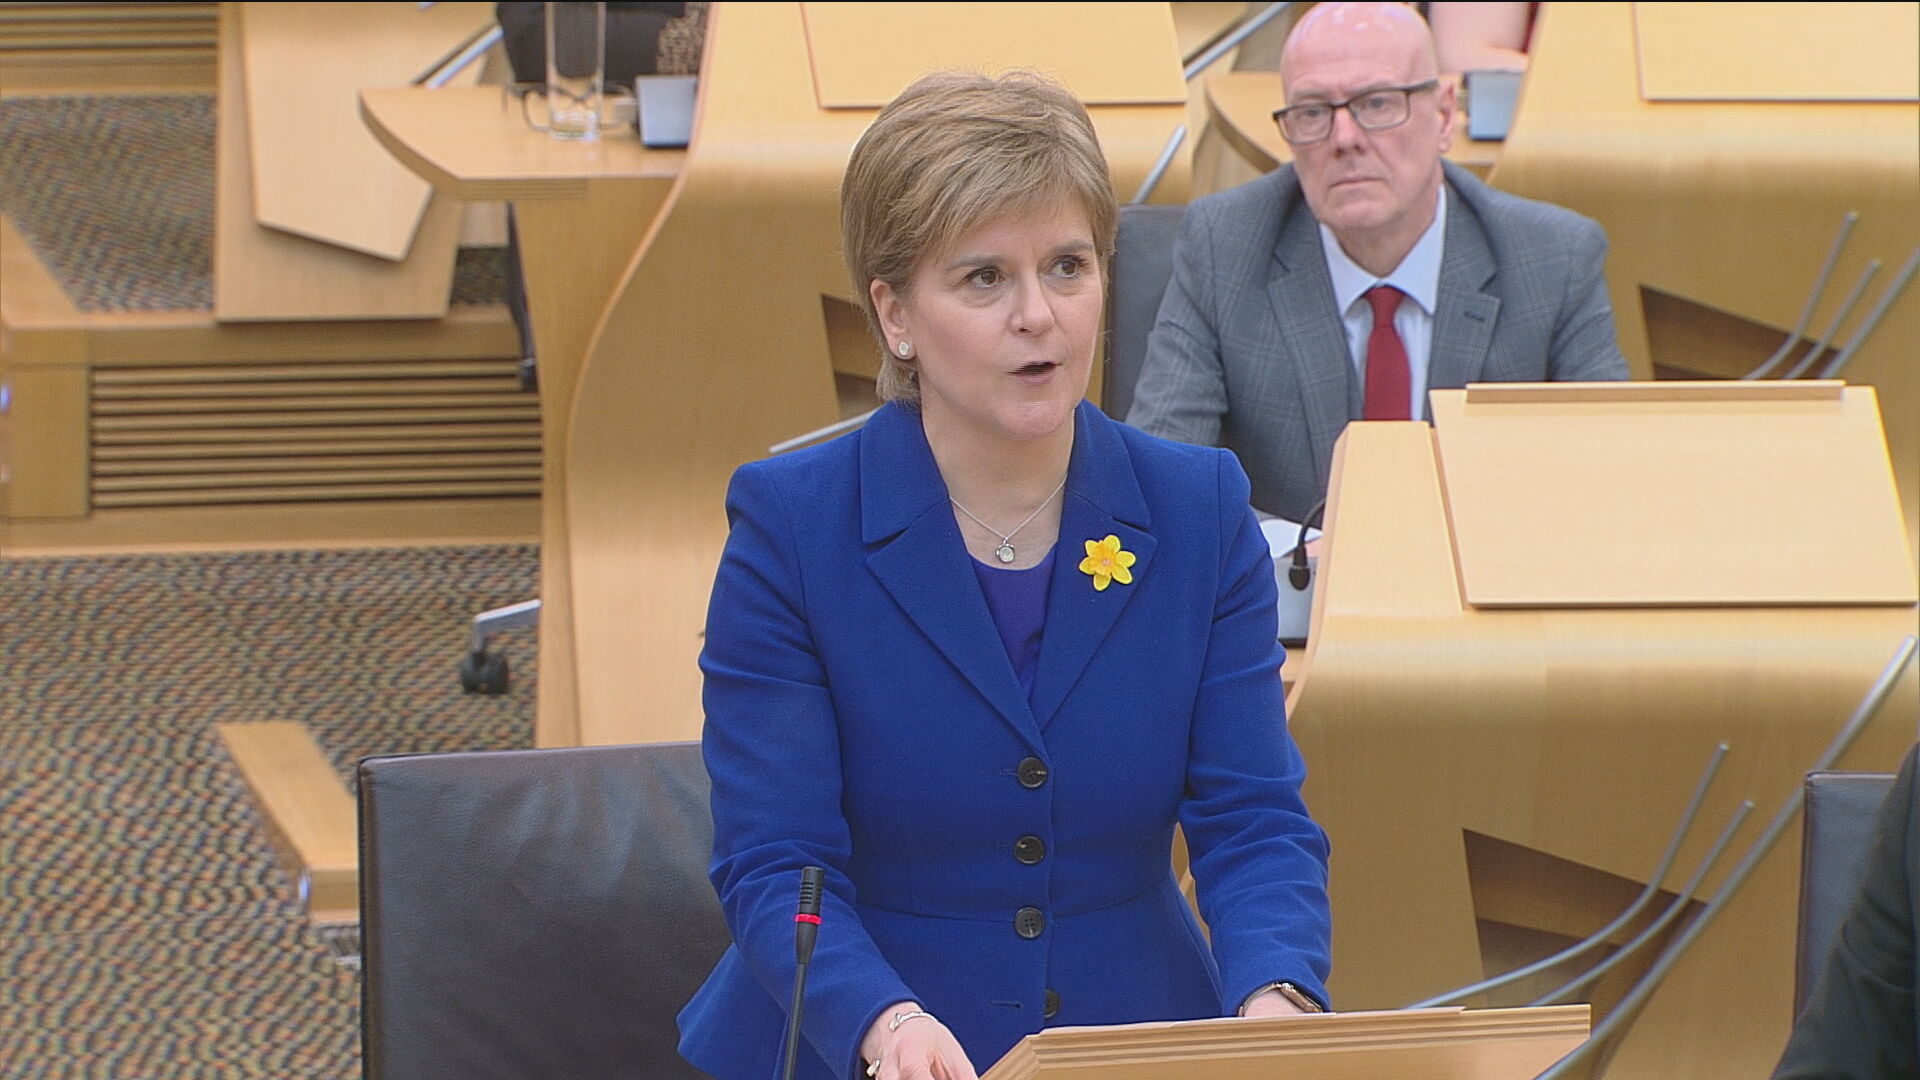 Nicola Sturgeon during her final Holyrood appearance as First Minister.